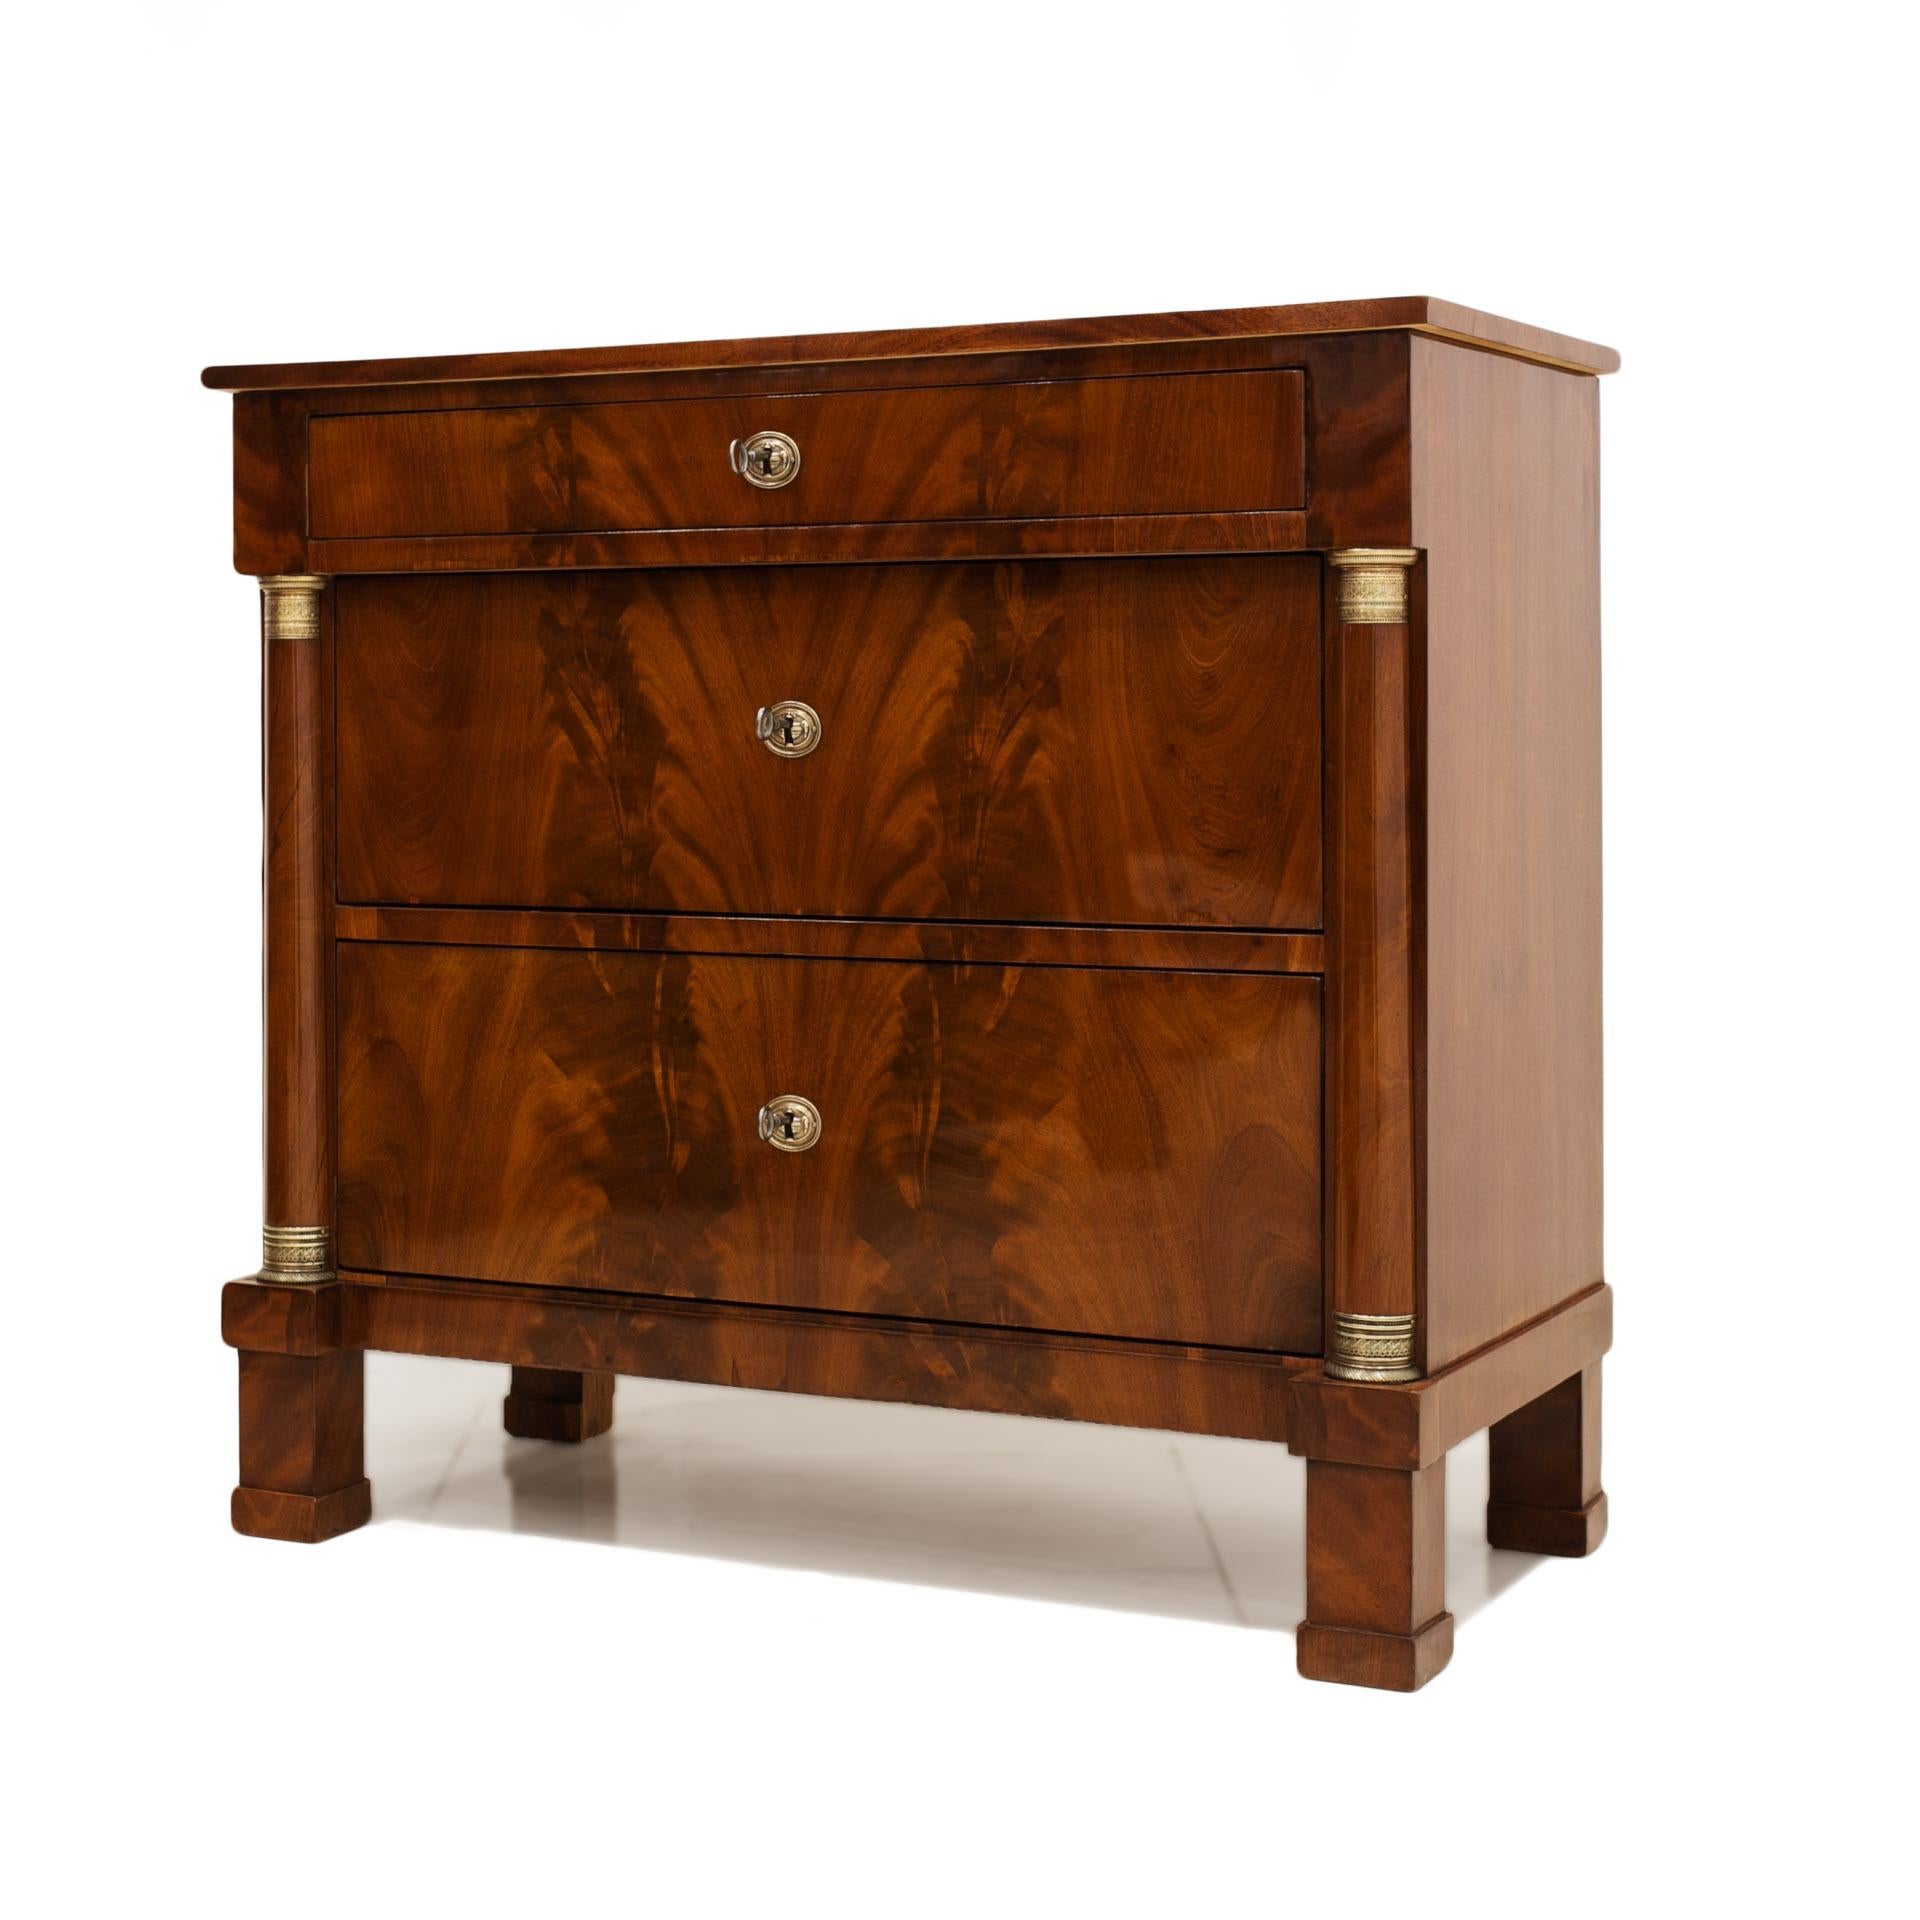 Biedermeier style chest of drawers from 19th century. This piece of furniture comes from France. It was veneered with beautiful mahogany pyramid veneer. It features 2 big drawers lockable with keys and 1 smaller one in the upper section. The chest